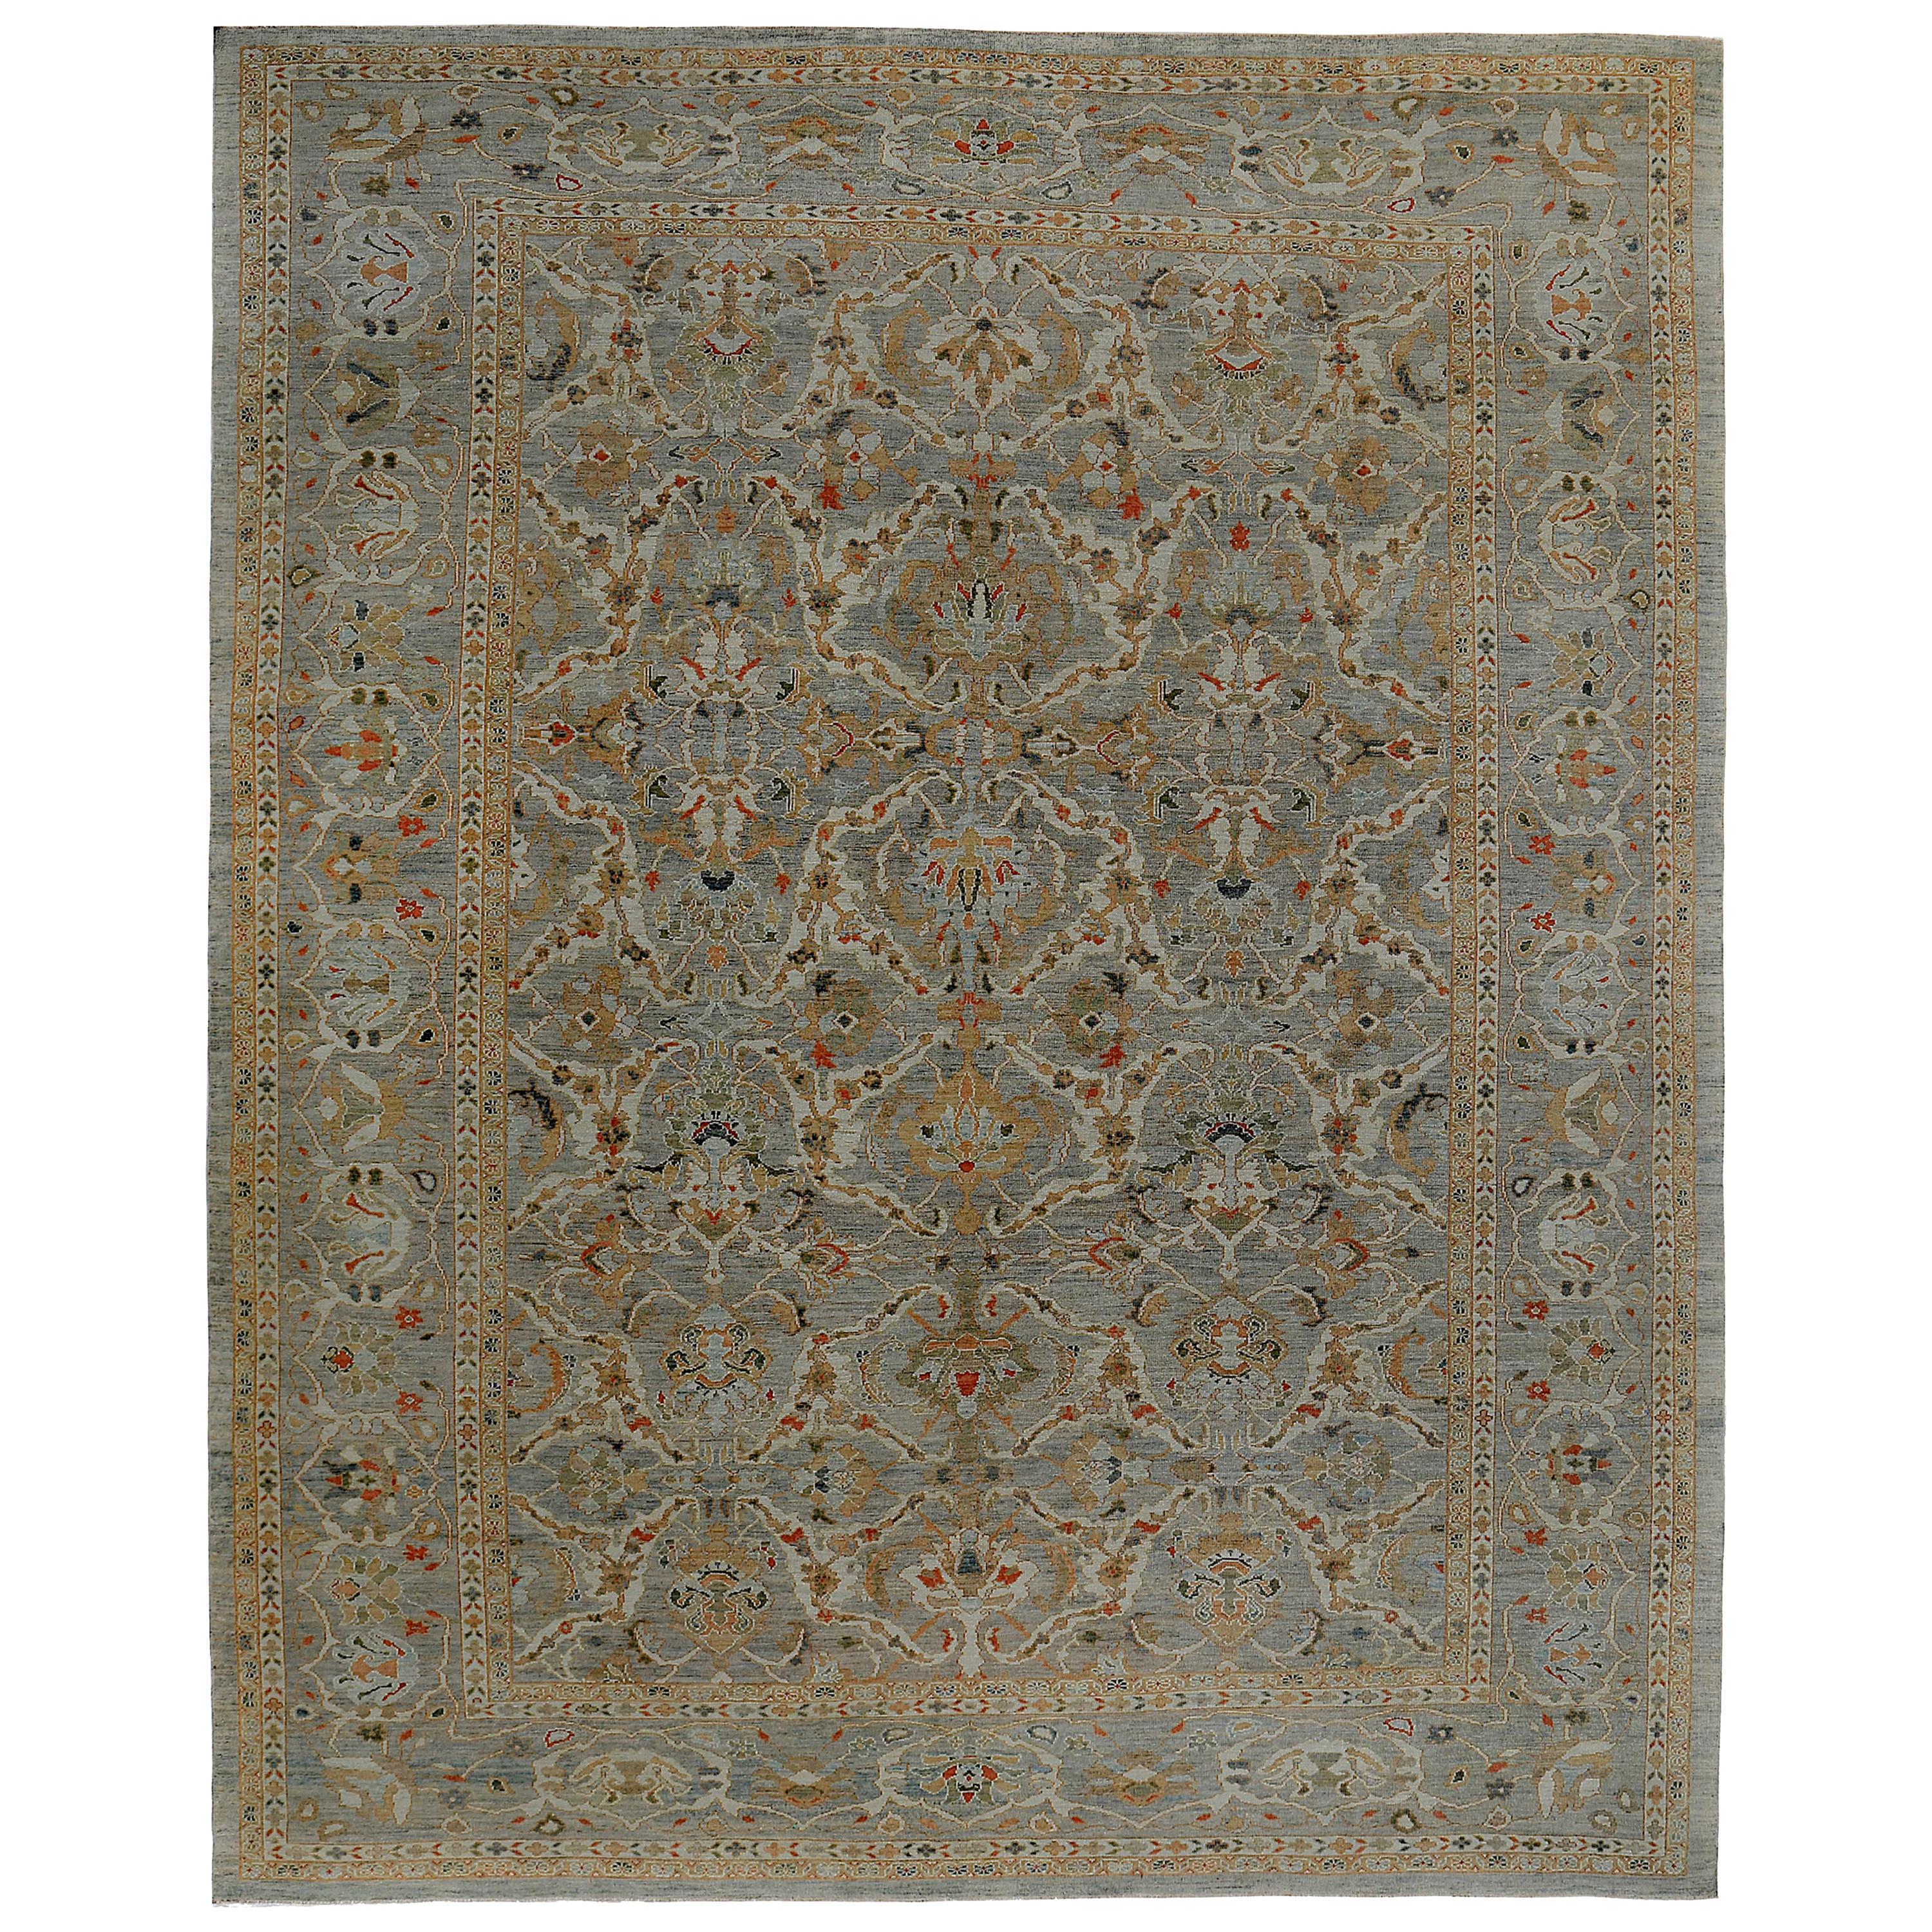 Oversize Turkish Rug Sultanabad Design with Navy and Red Botanical Details For Sale